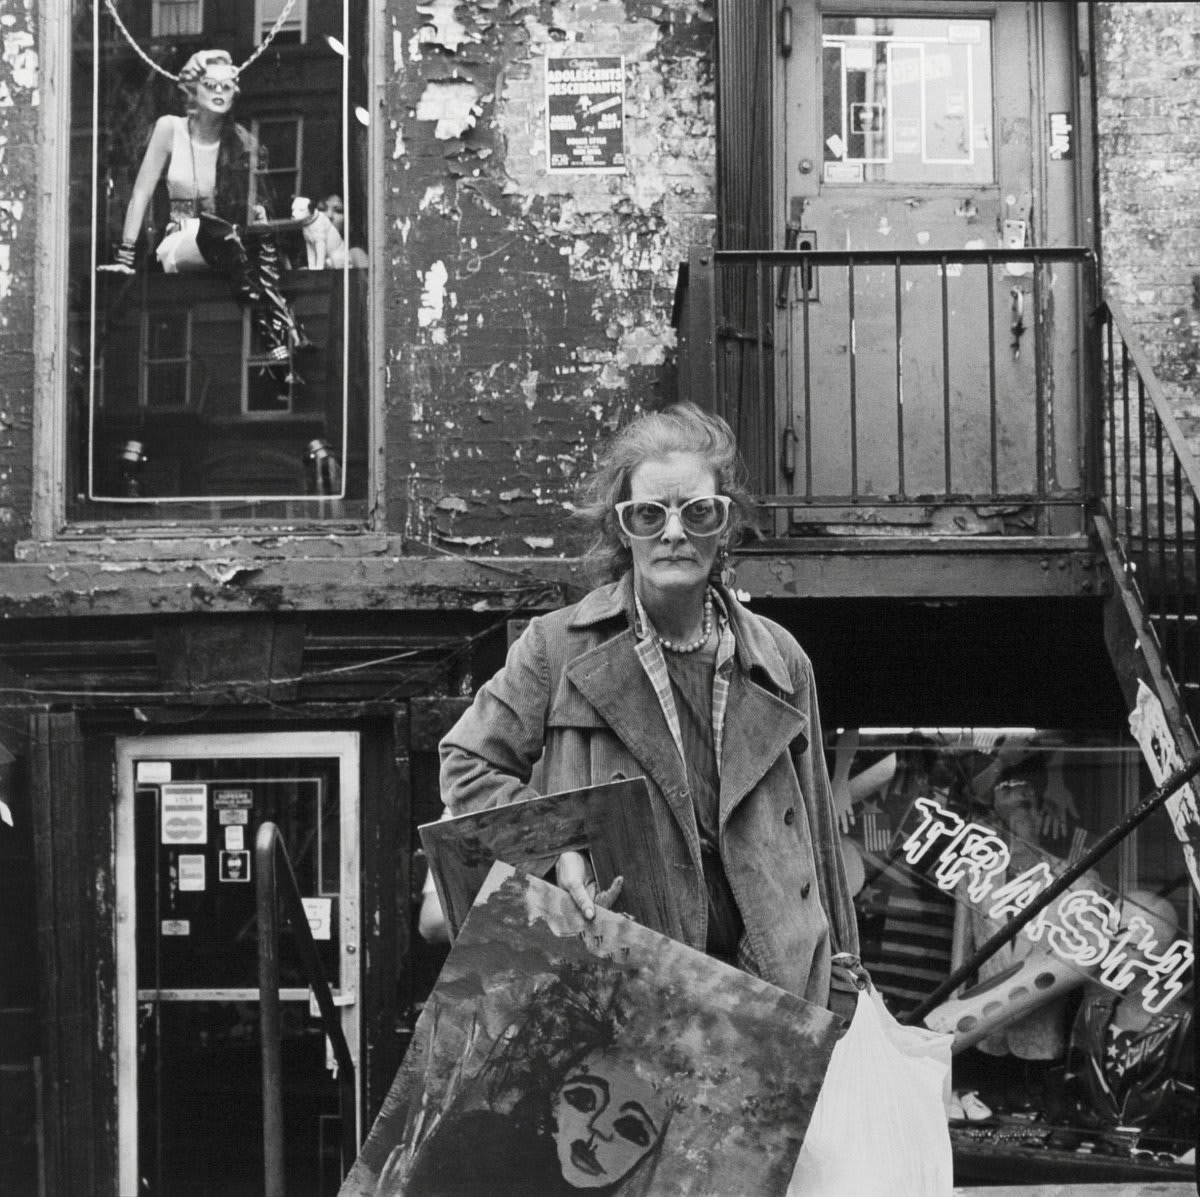 “We are the subject” opens at @BSG_NYC on July 12. The show features the work of Lisette Model, Diane Arbus and Rosalind Fox Solomon. https://t.co/IO2CUplMdE 📷 Rosalind Solomon, An East Village Painter, New York, New York USA, 1986. Courtesy Bruce Silverstein Gallery.